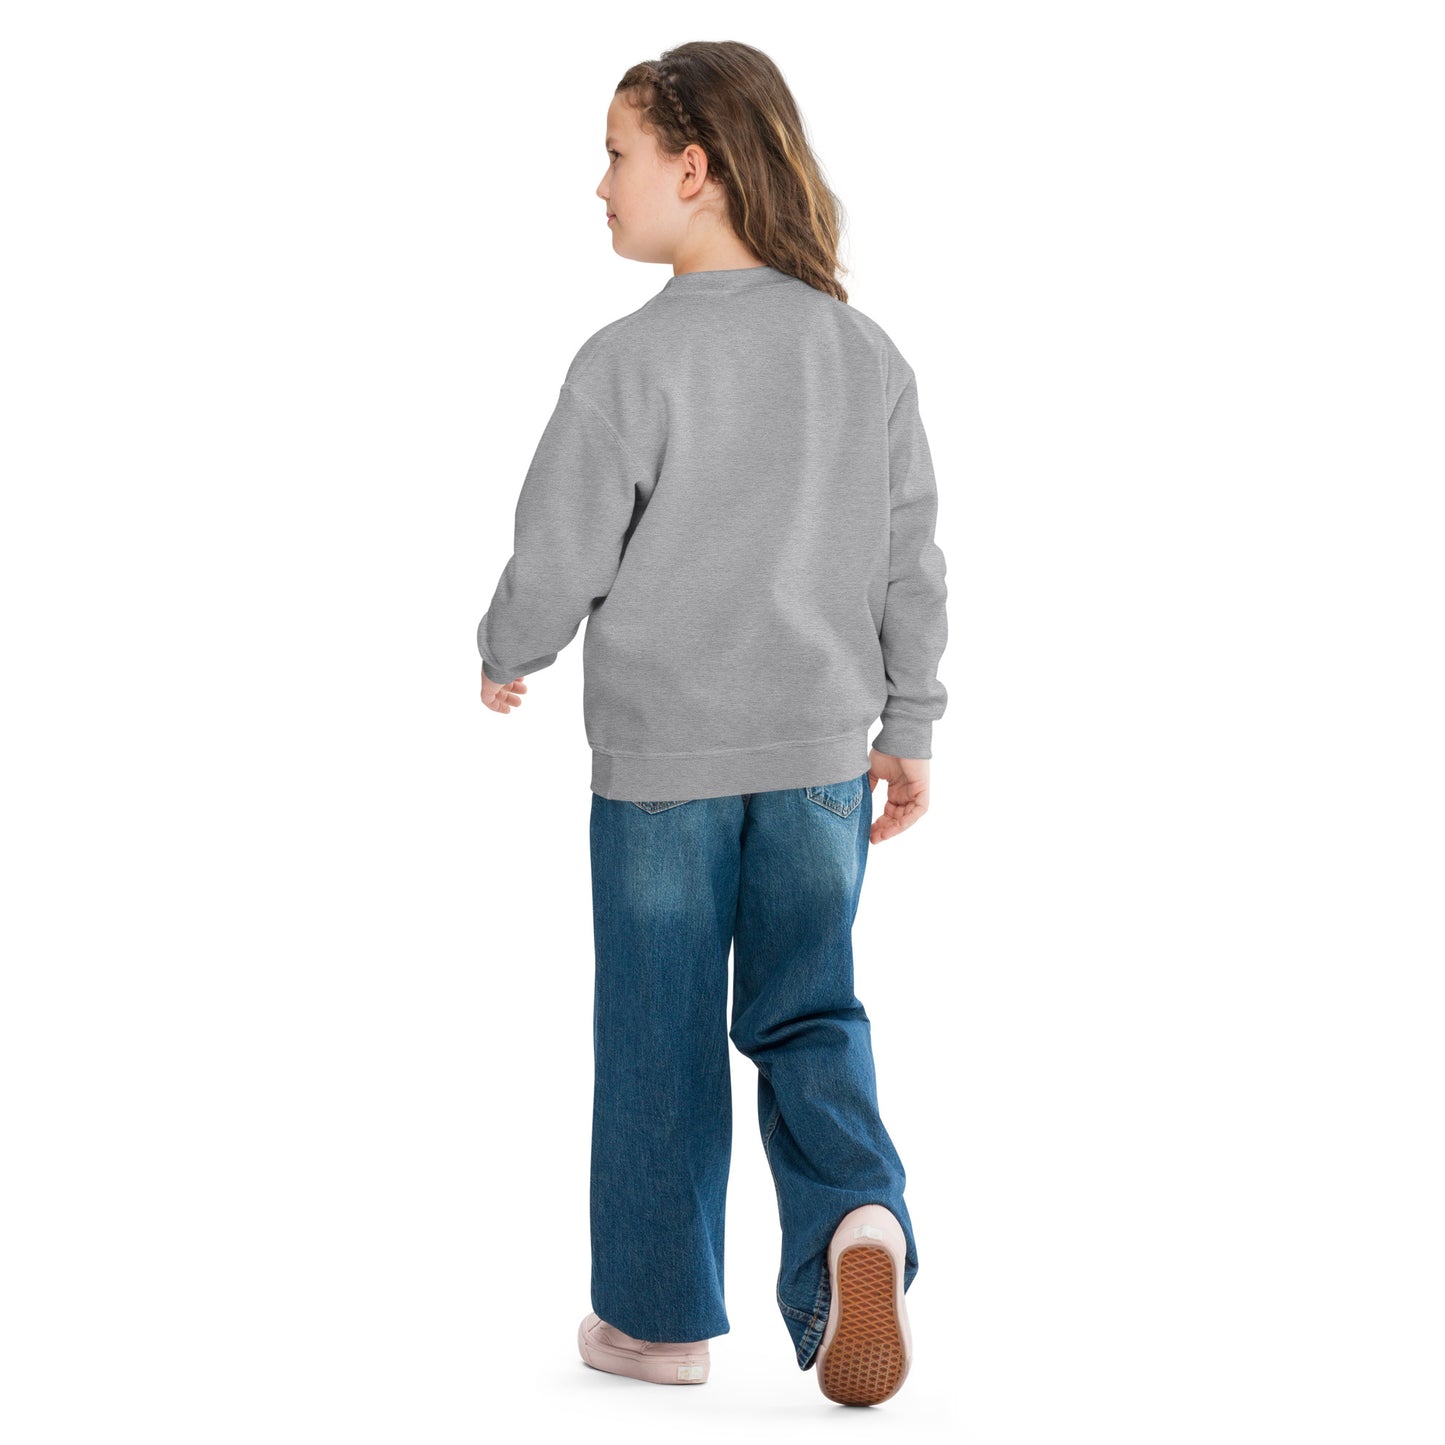 a little girl wearing a grey sweatshirt and jeans